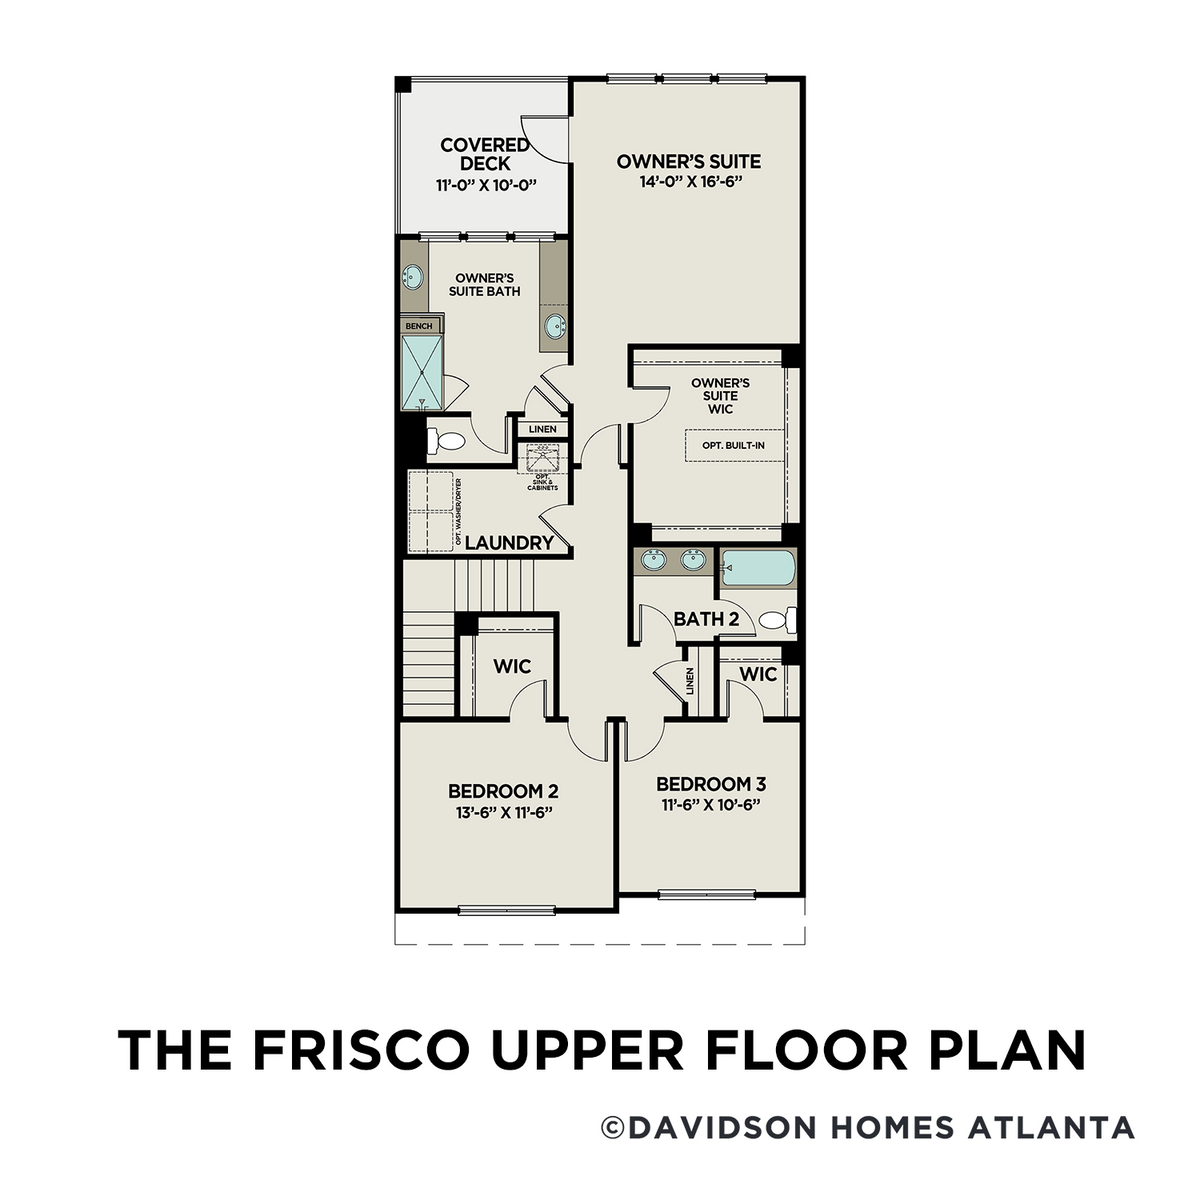 2 - The Frisco A floor plan layout for 687 Stickley Oak Way in Davidson Homes' The Village at Towne Lake community.